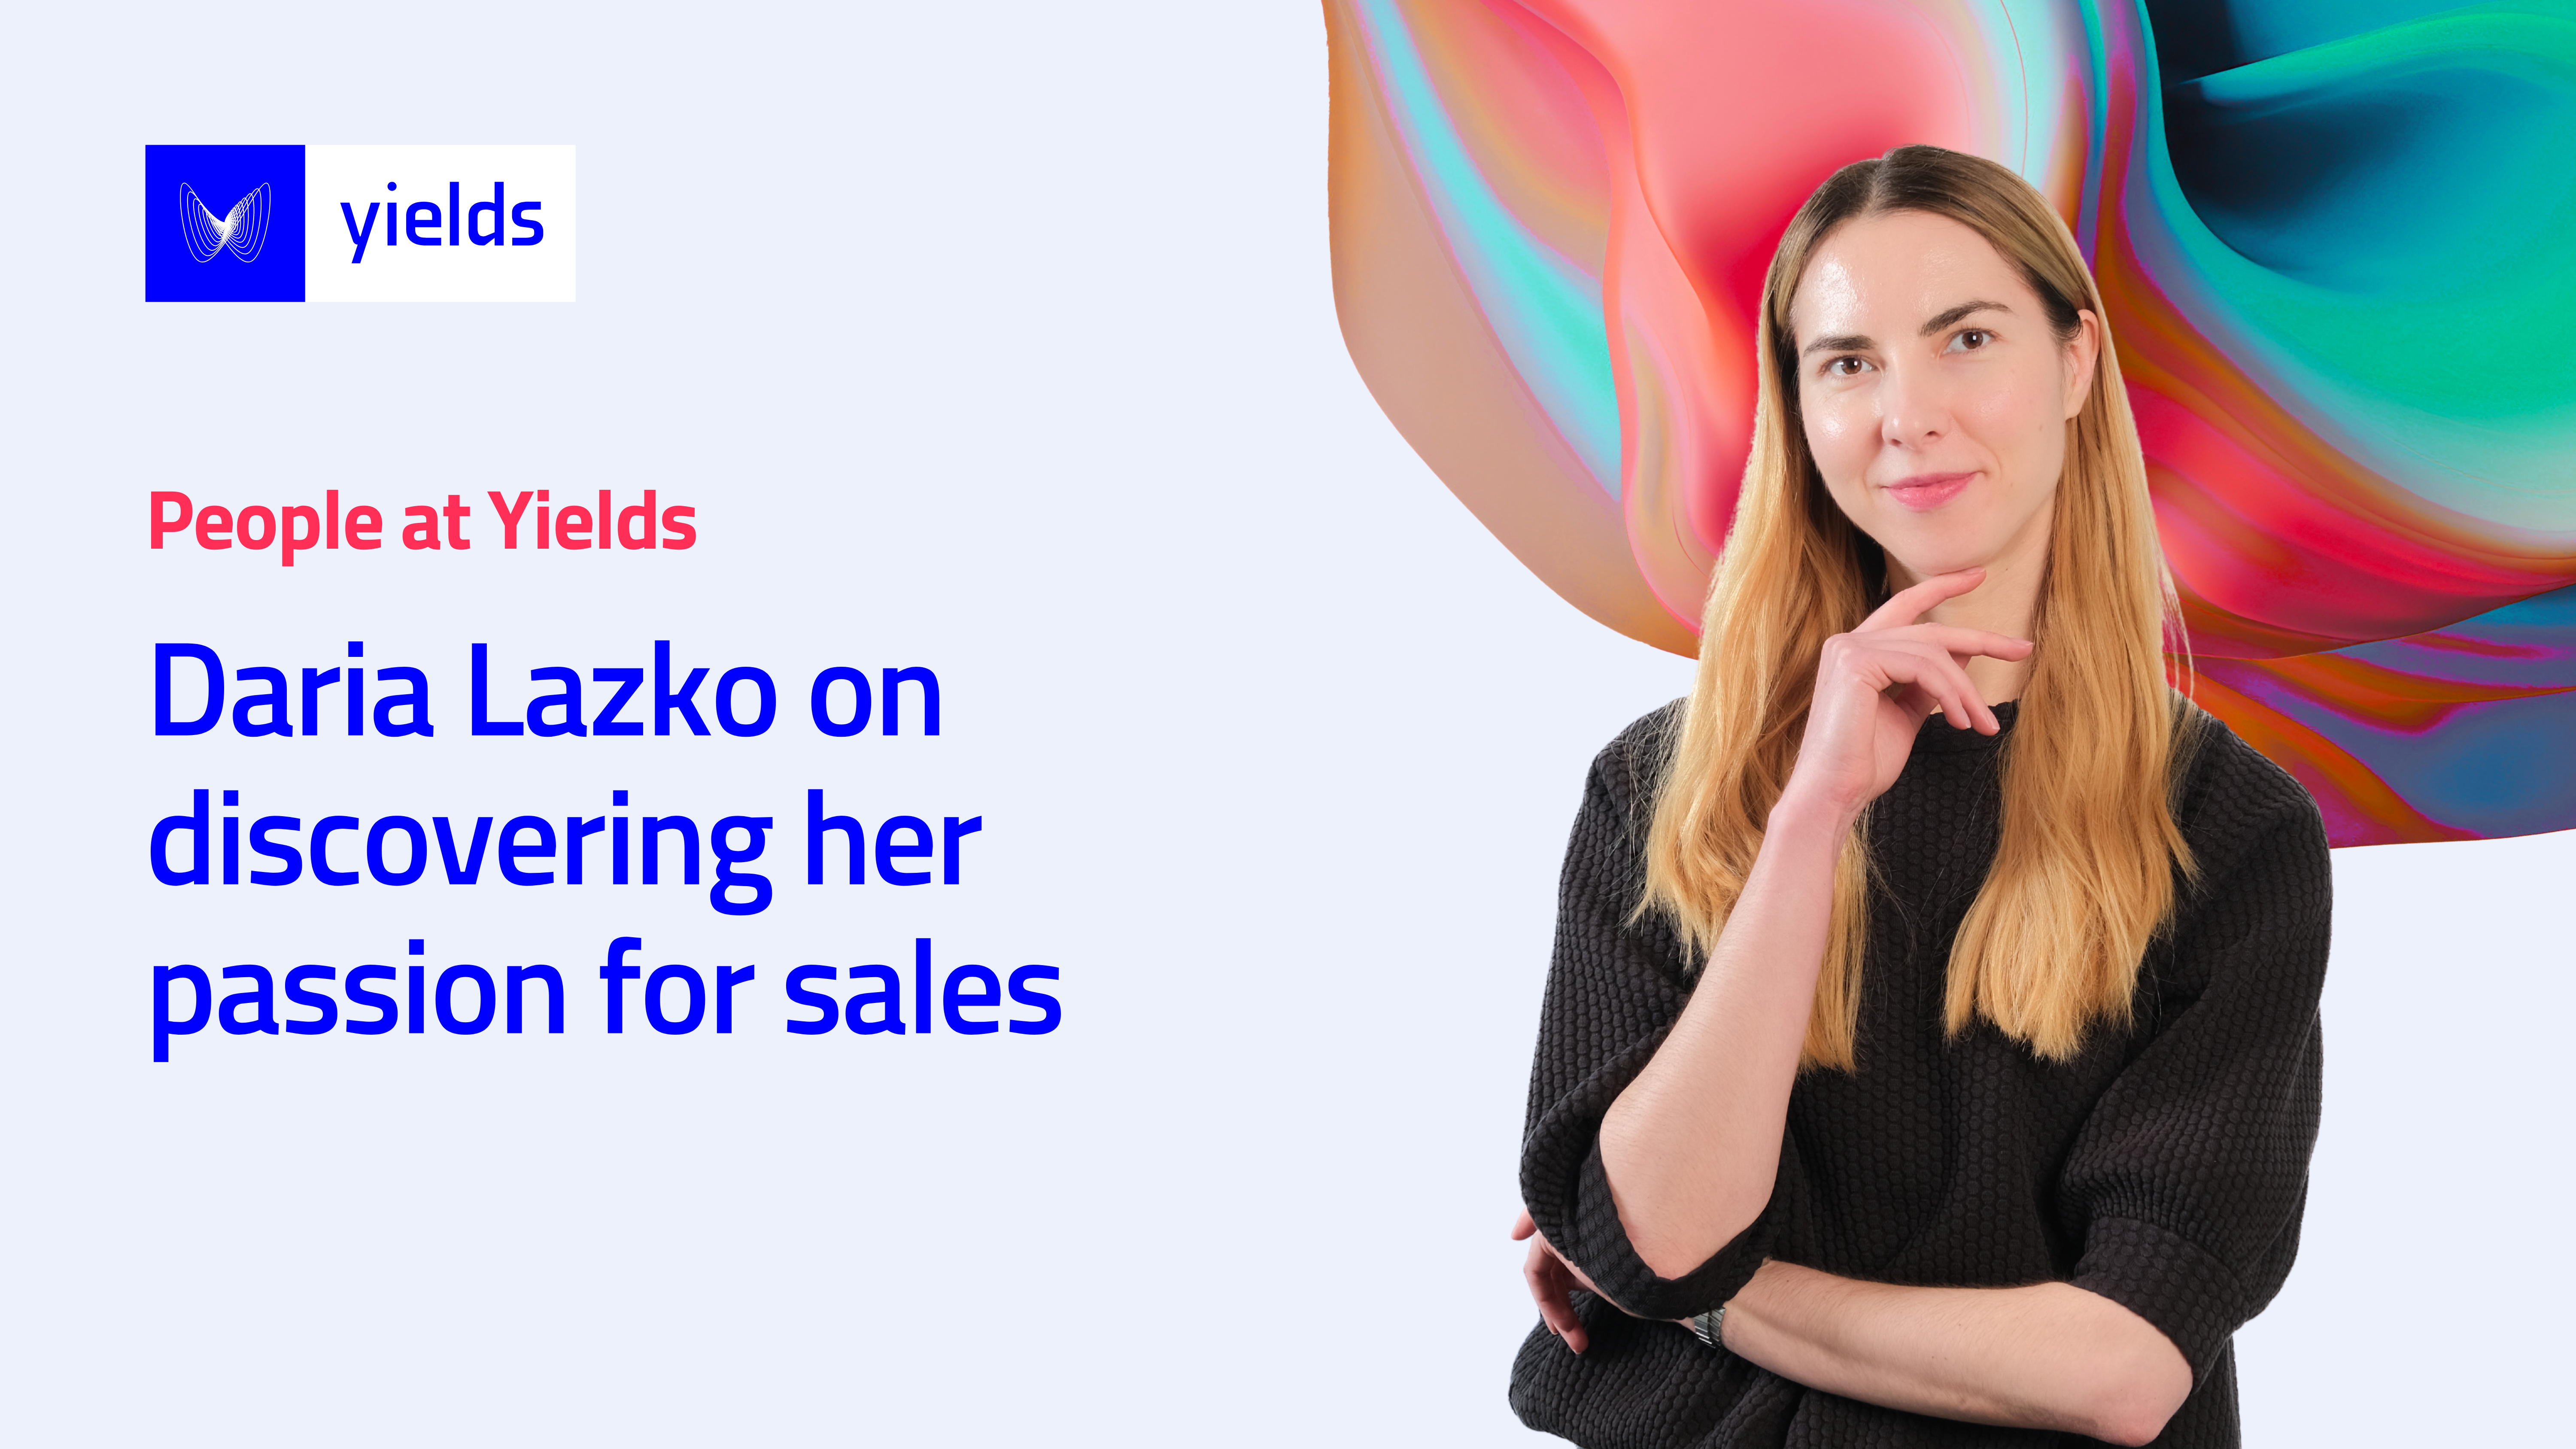 Daria Lazko on discovering her passion for sales